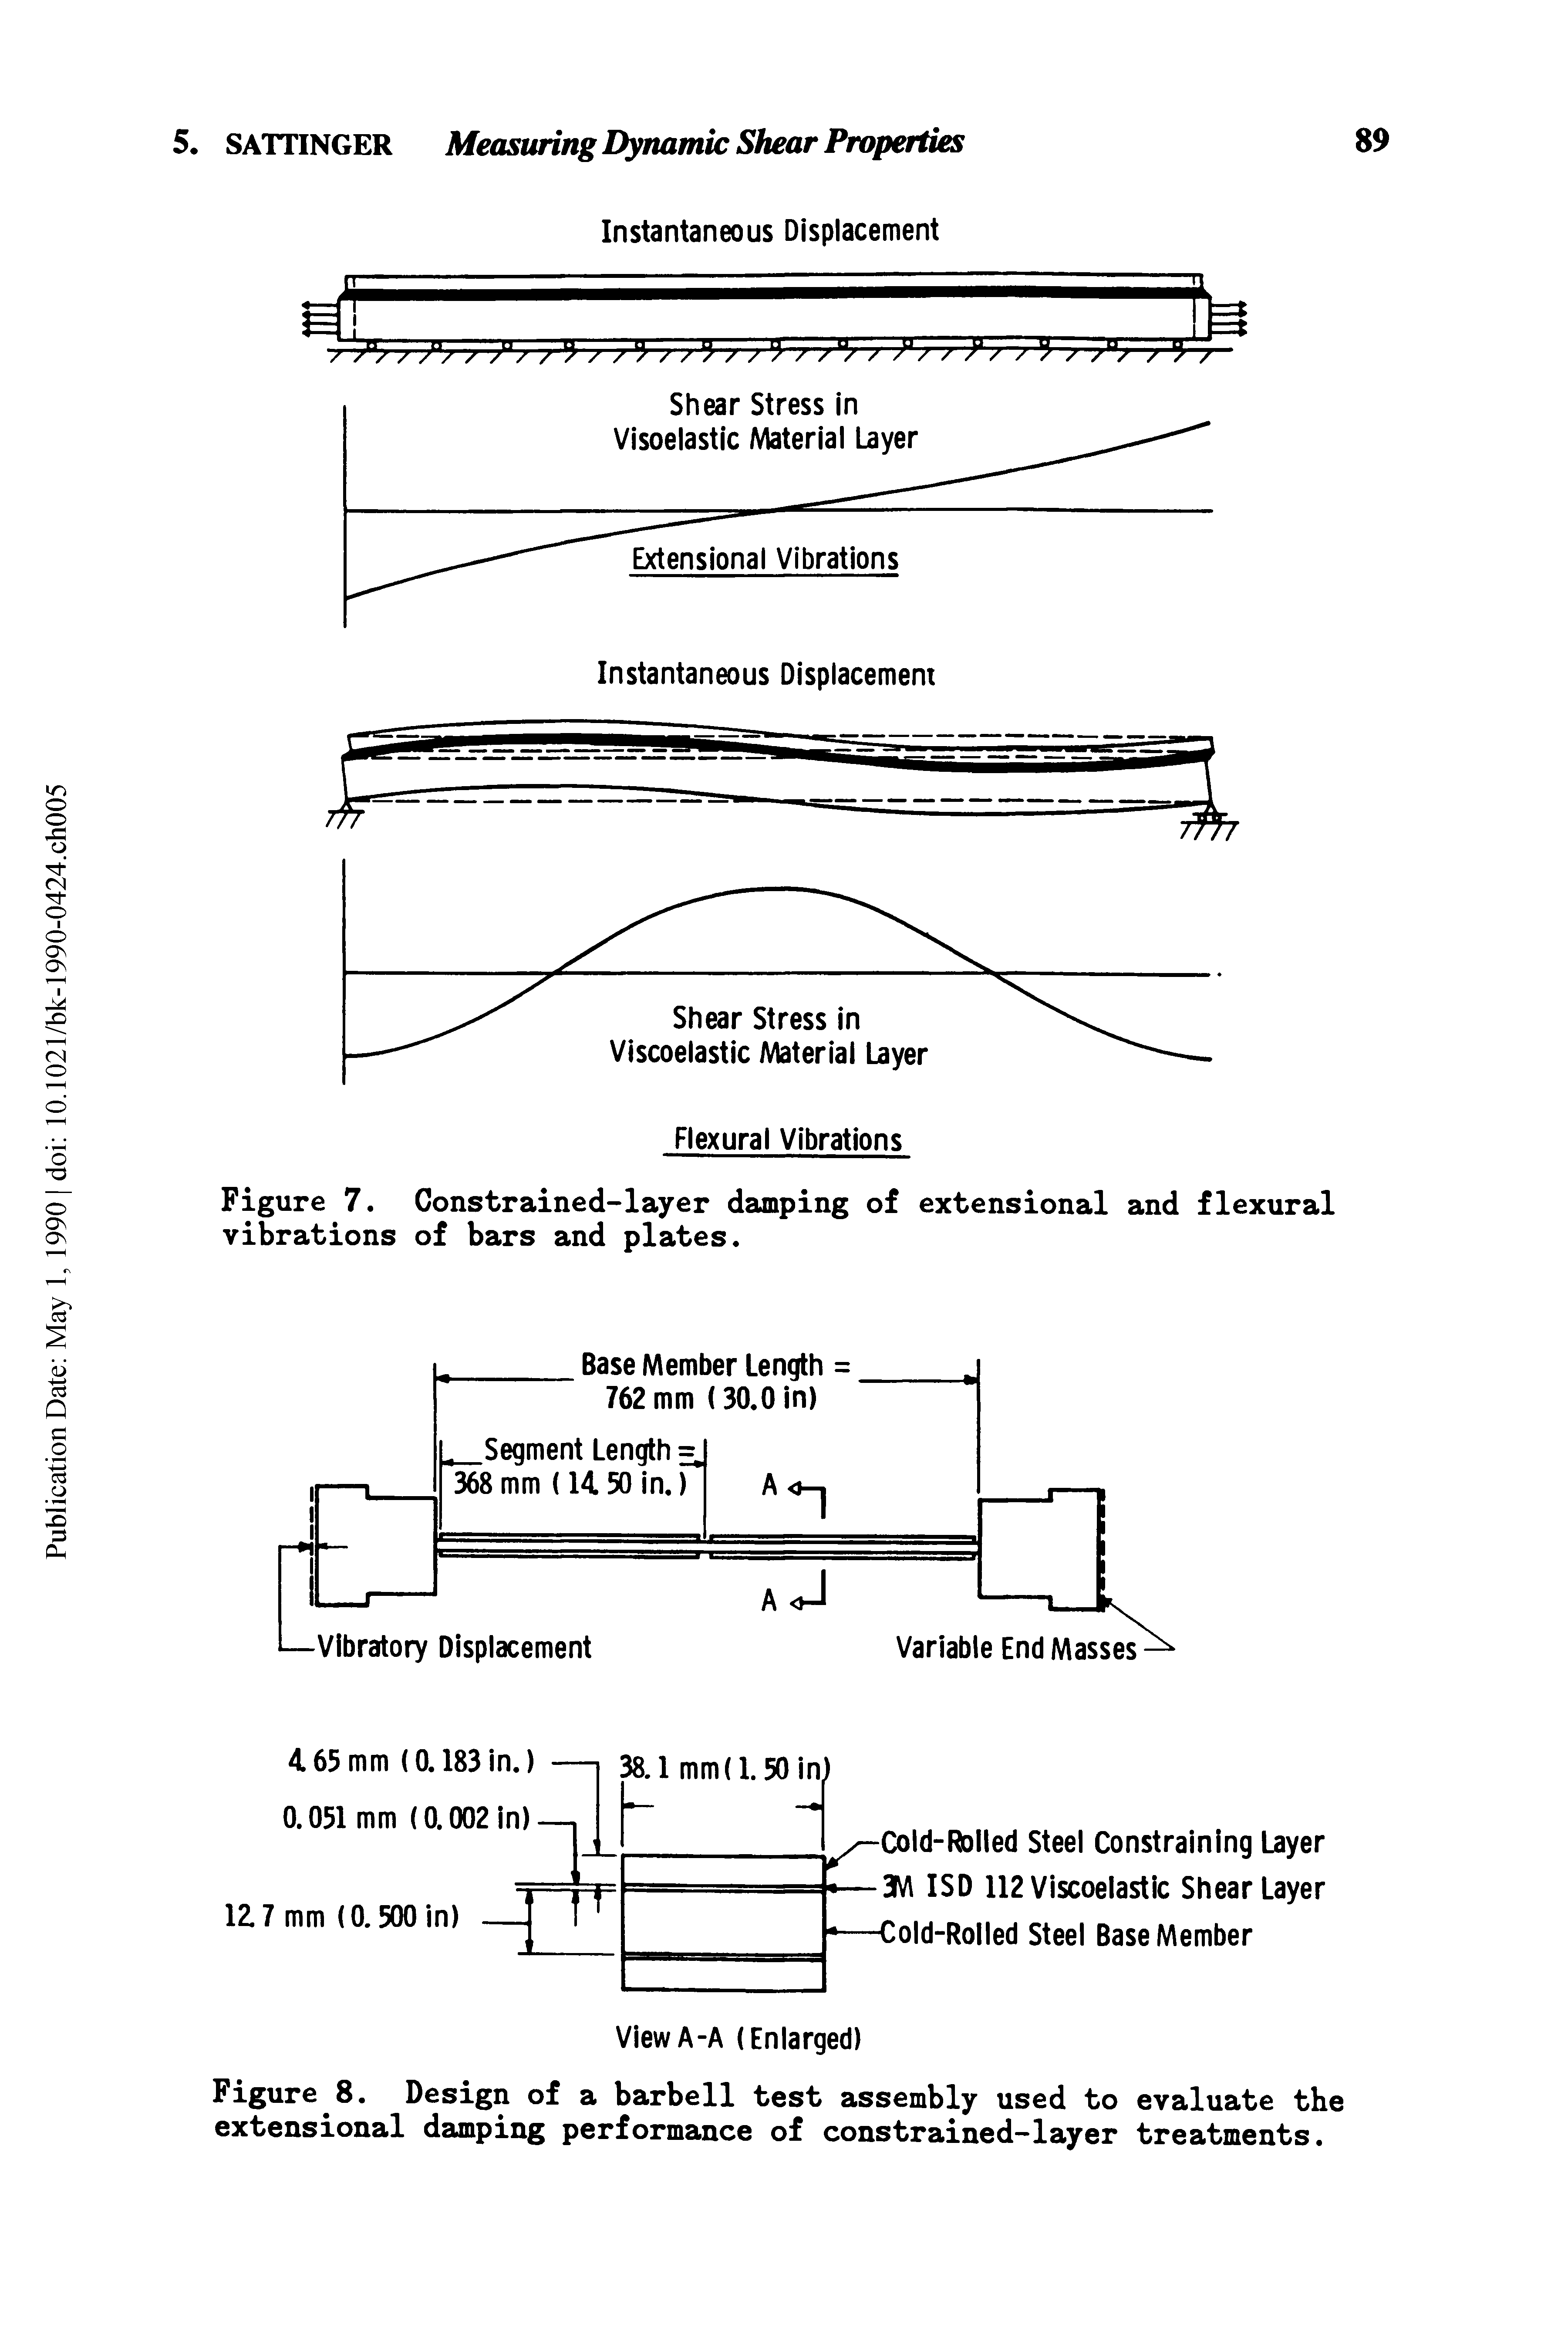 Figure 8. Design of a barbell test assembly used to evaluate the extensional damping performance of constrained-layer treatments.